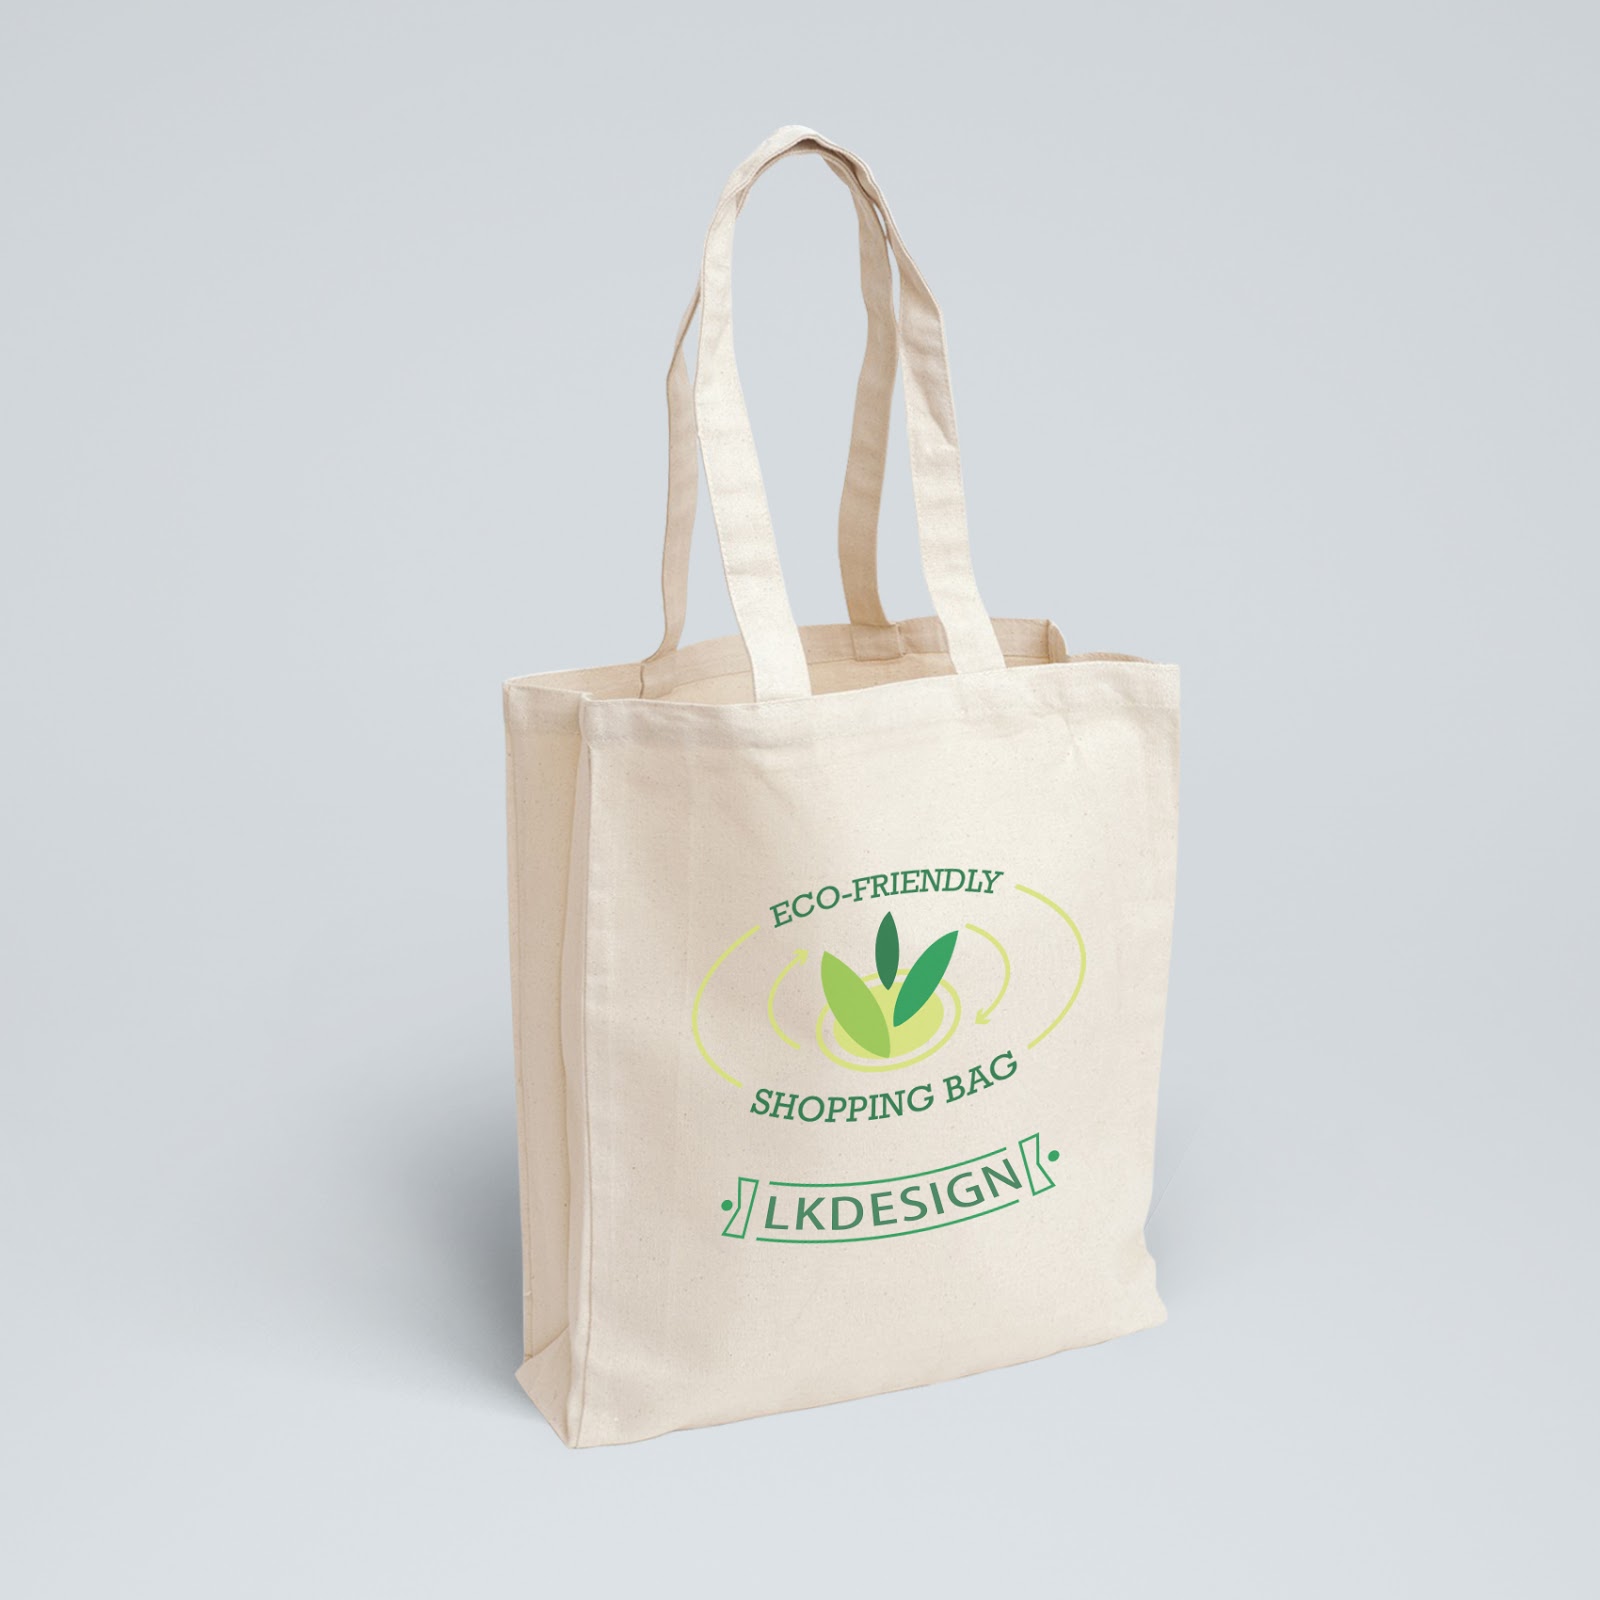 LK DESIGN - Customized Promotional Products for Small Business: Customized Tote Bag for Business ...